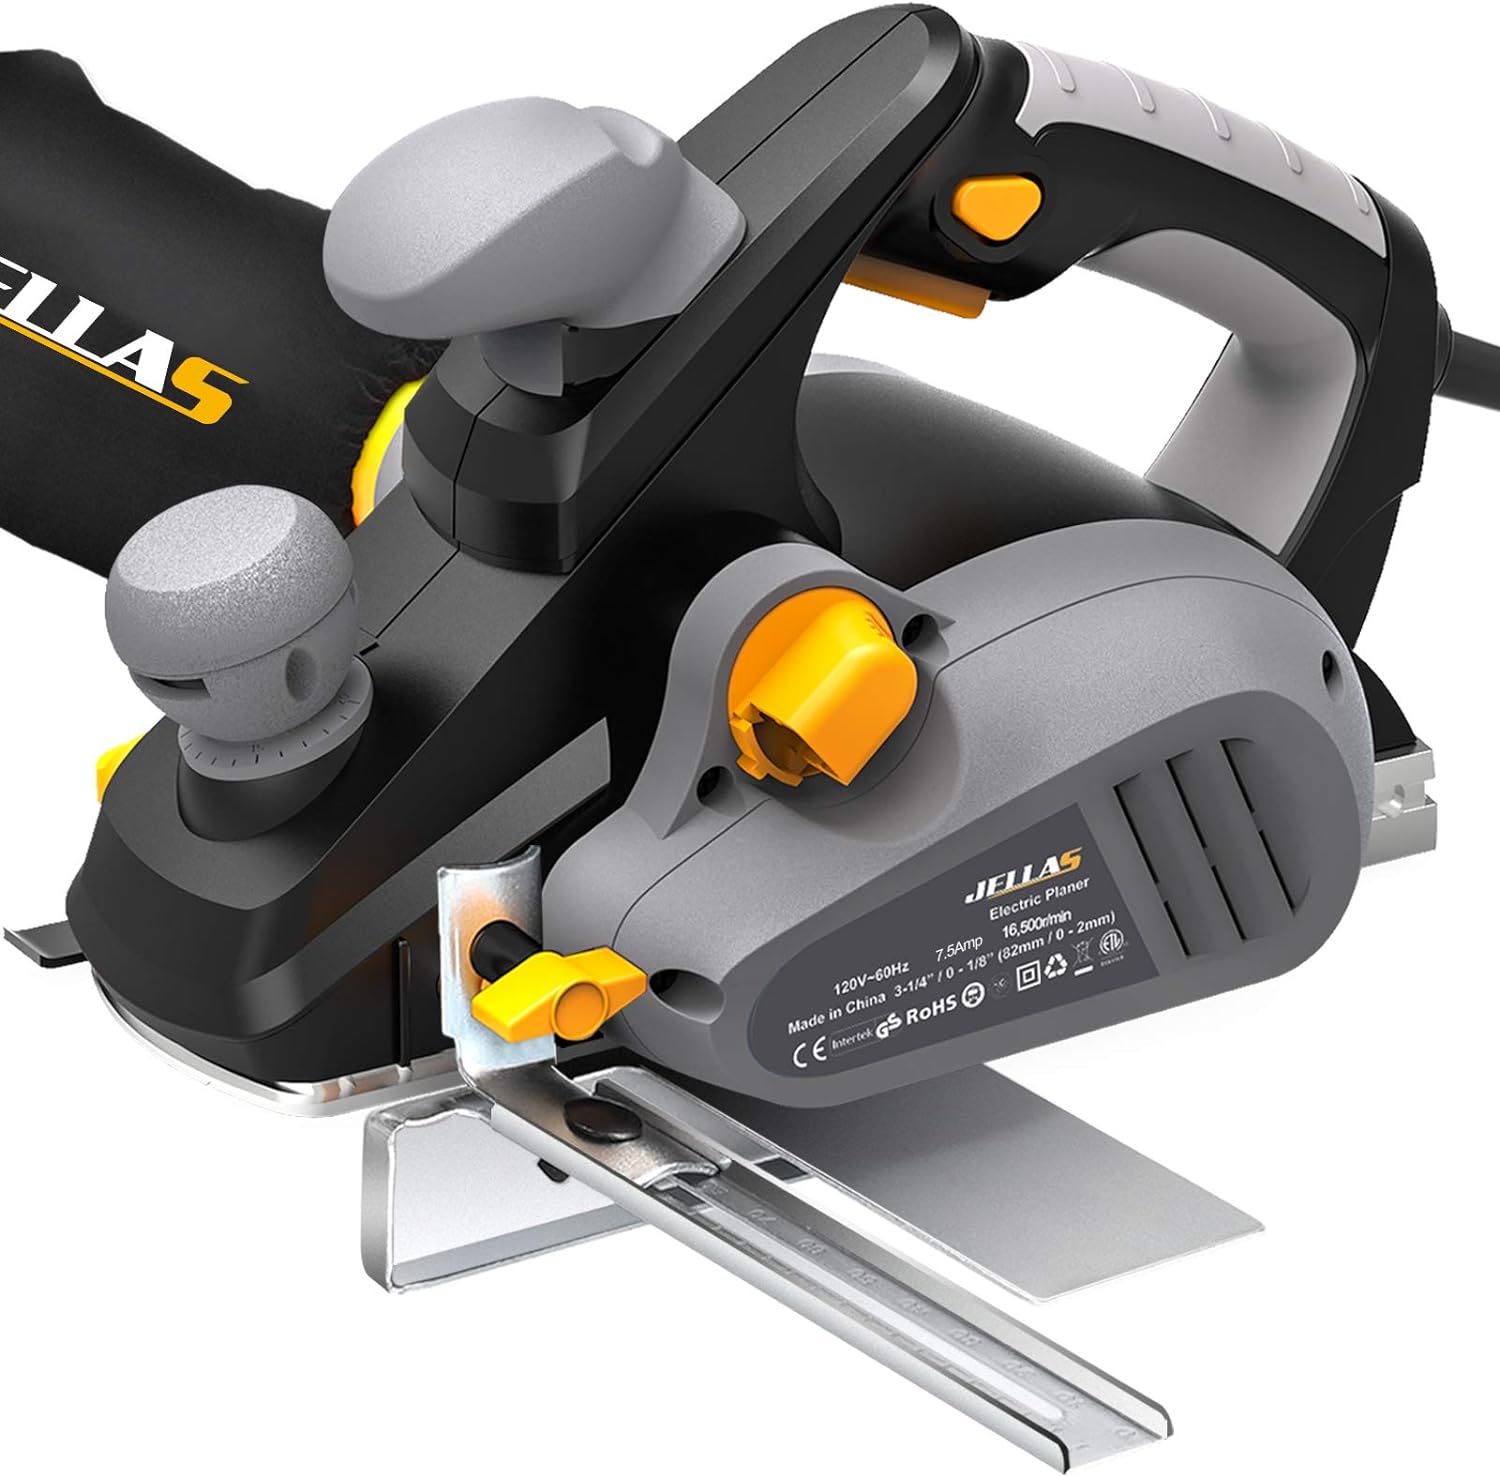 Jellas Electric Planer, JELLAS 7.5-Amp 16500 Rpm Power Hand Planer, 3-1/4 Inch Cut Width, Dual-dust out System, Dual-handle Design, Bl